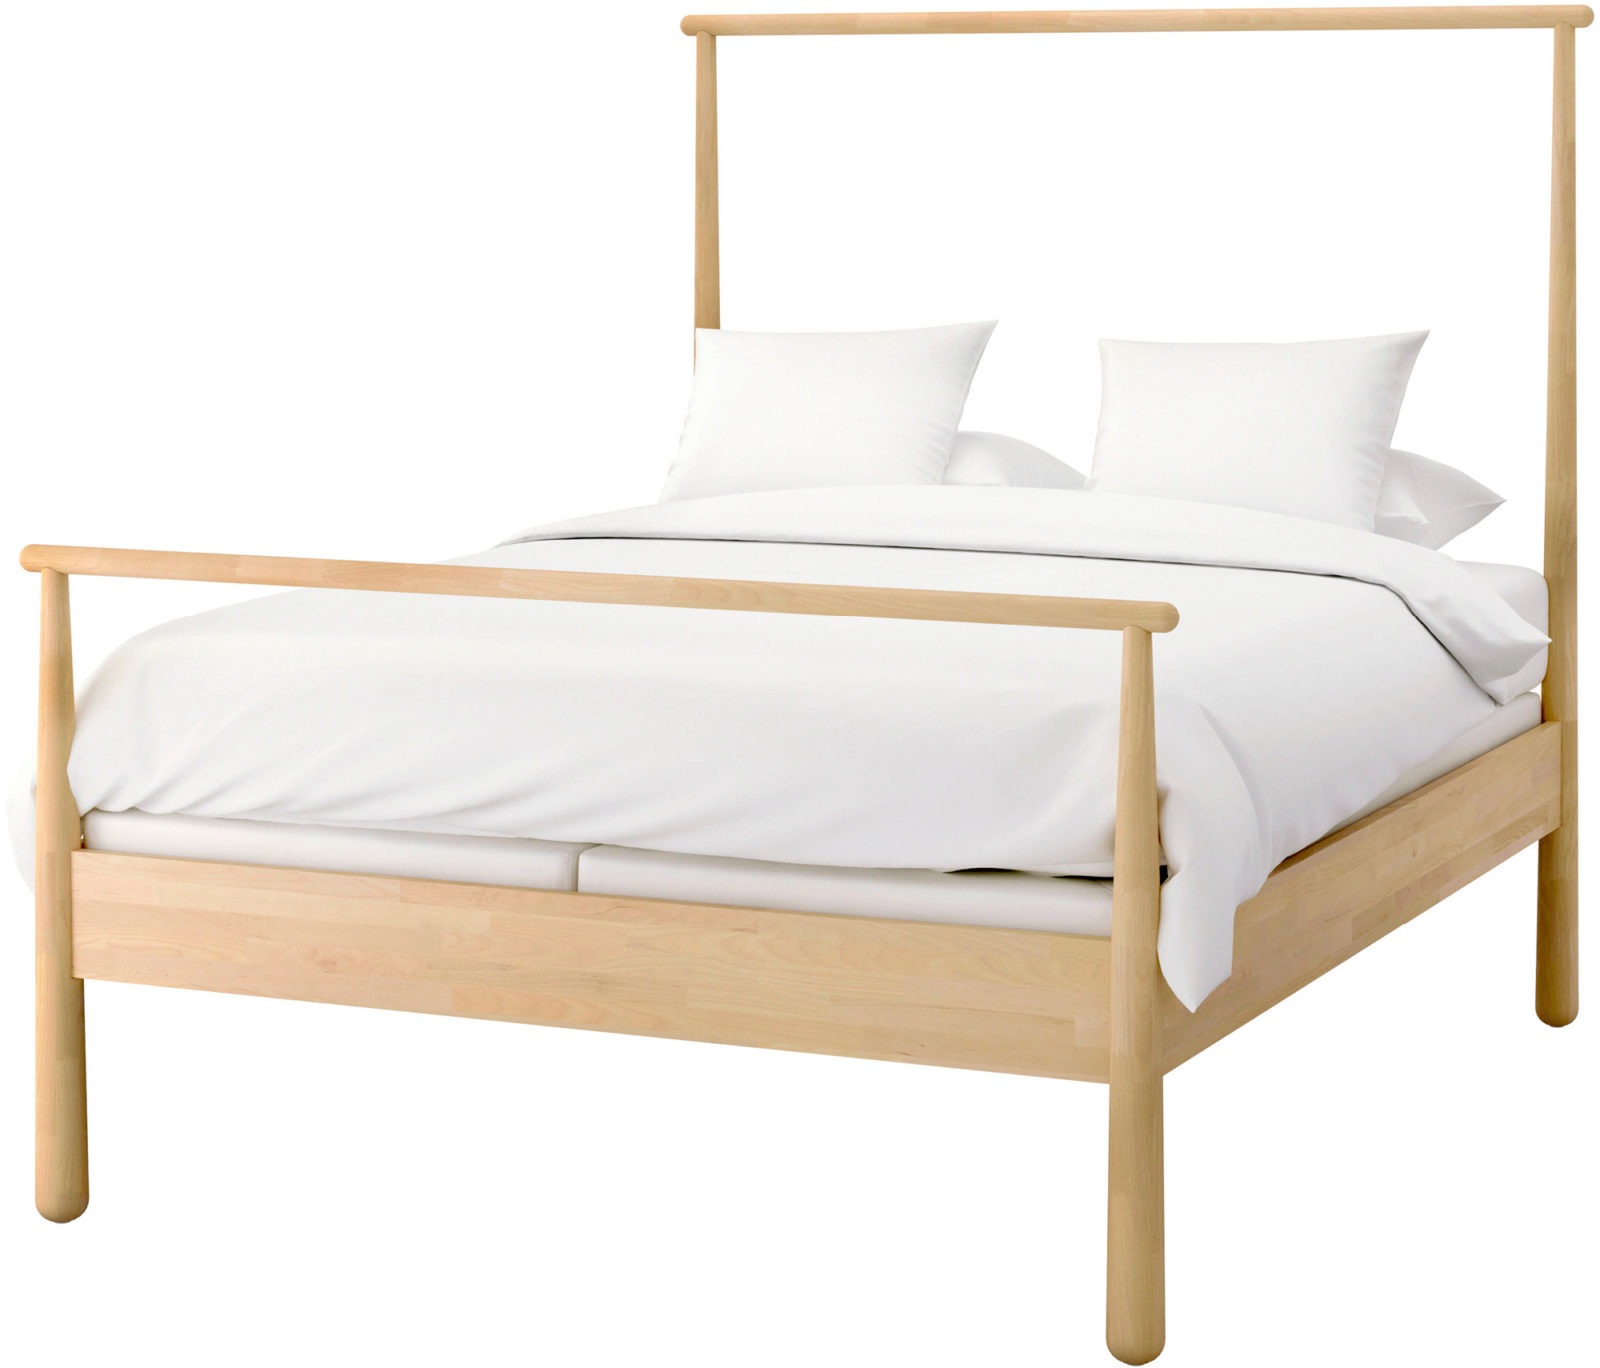 A bed made from untreated massive birch, one end higher than the other, GJÖRA.